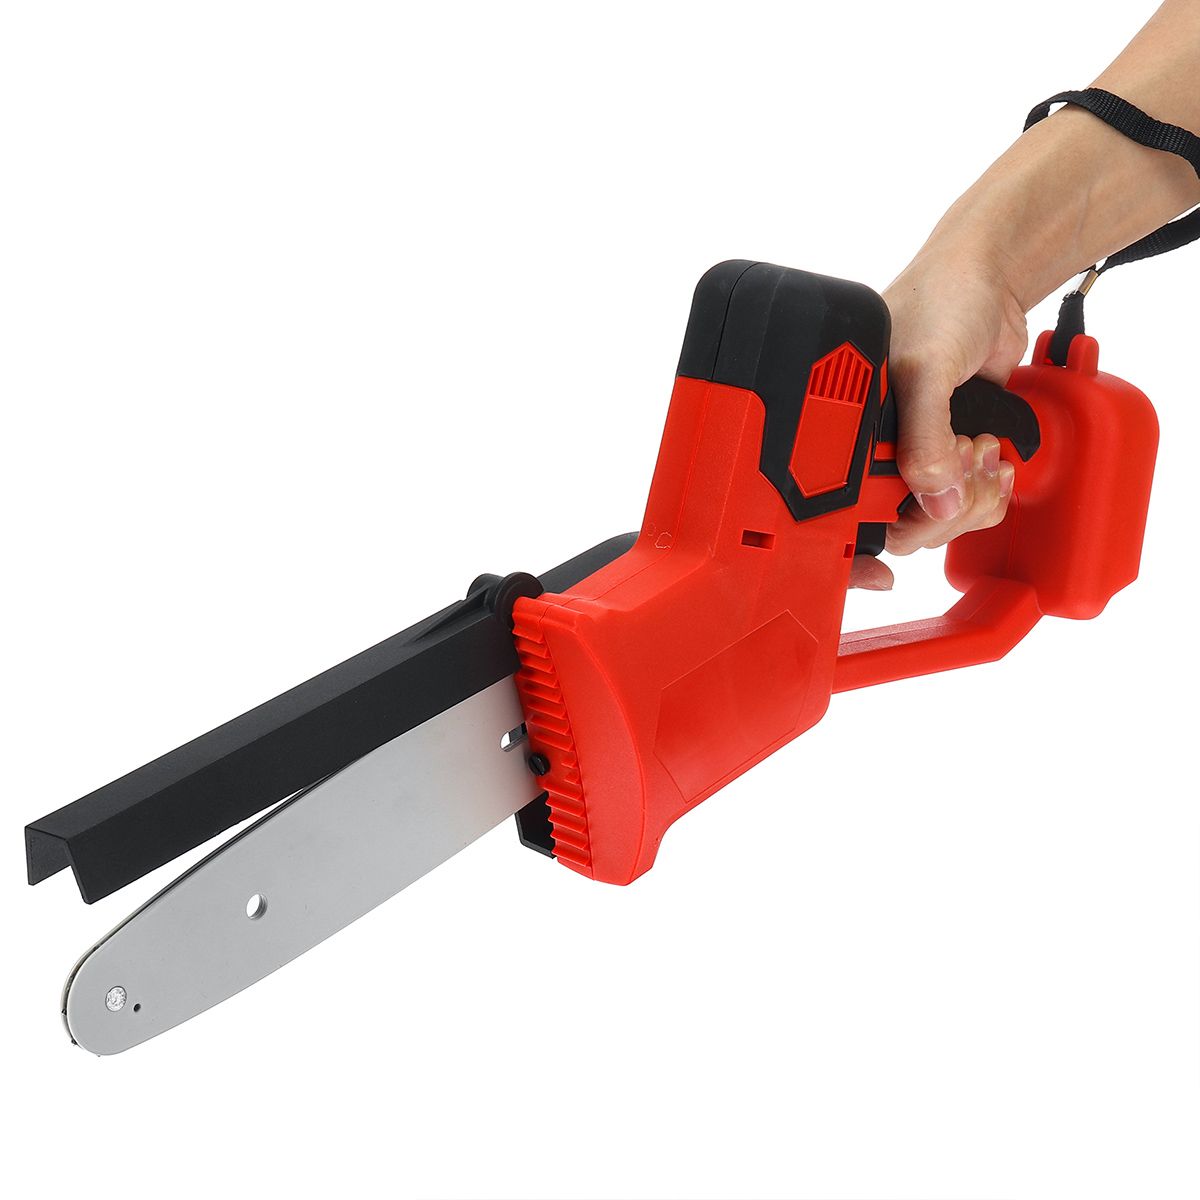 Portable-One-Hand-Saw-Woodworking-Electric-Chain-Saw-Wood-Cutter-For-Makita-21V-Battery-1755317